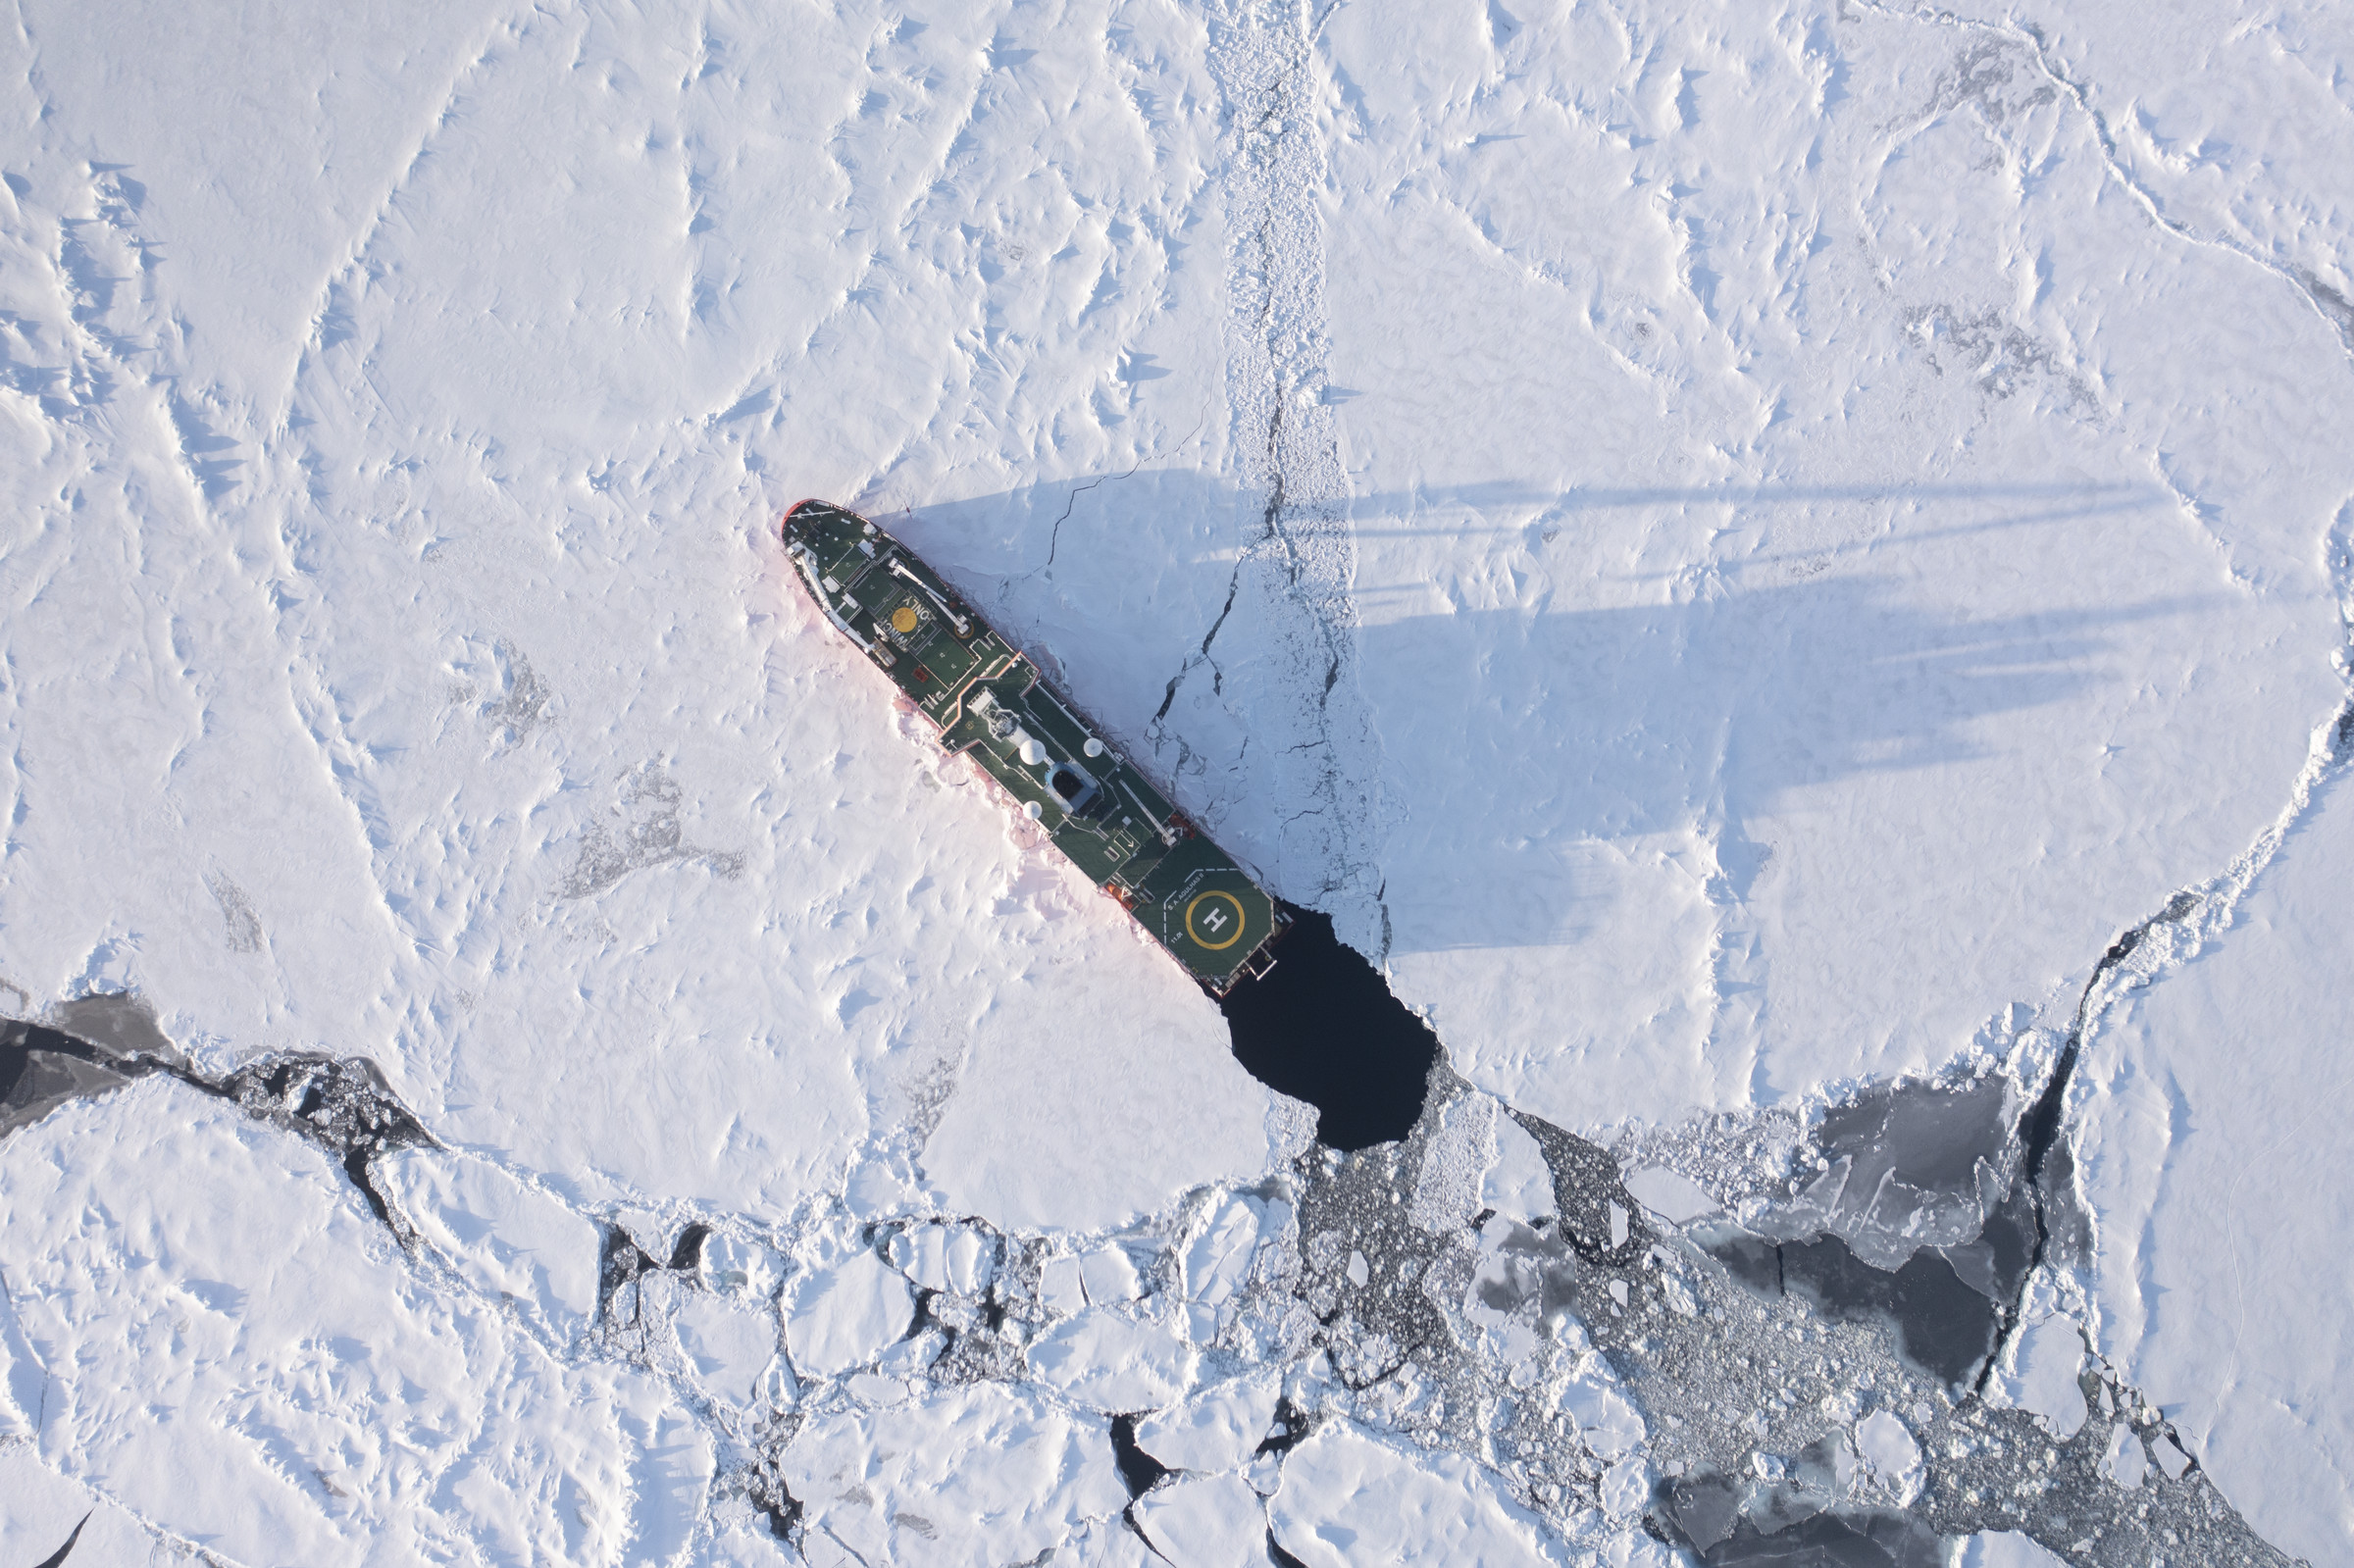 The Endurance22 mission’s icebreaker S.A. Agulhas II surrounded by sea ice 